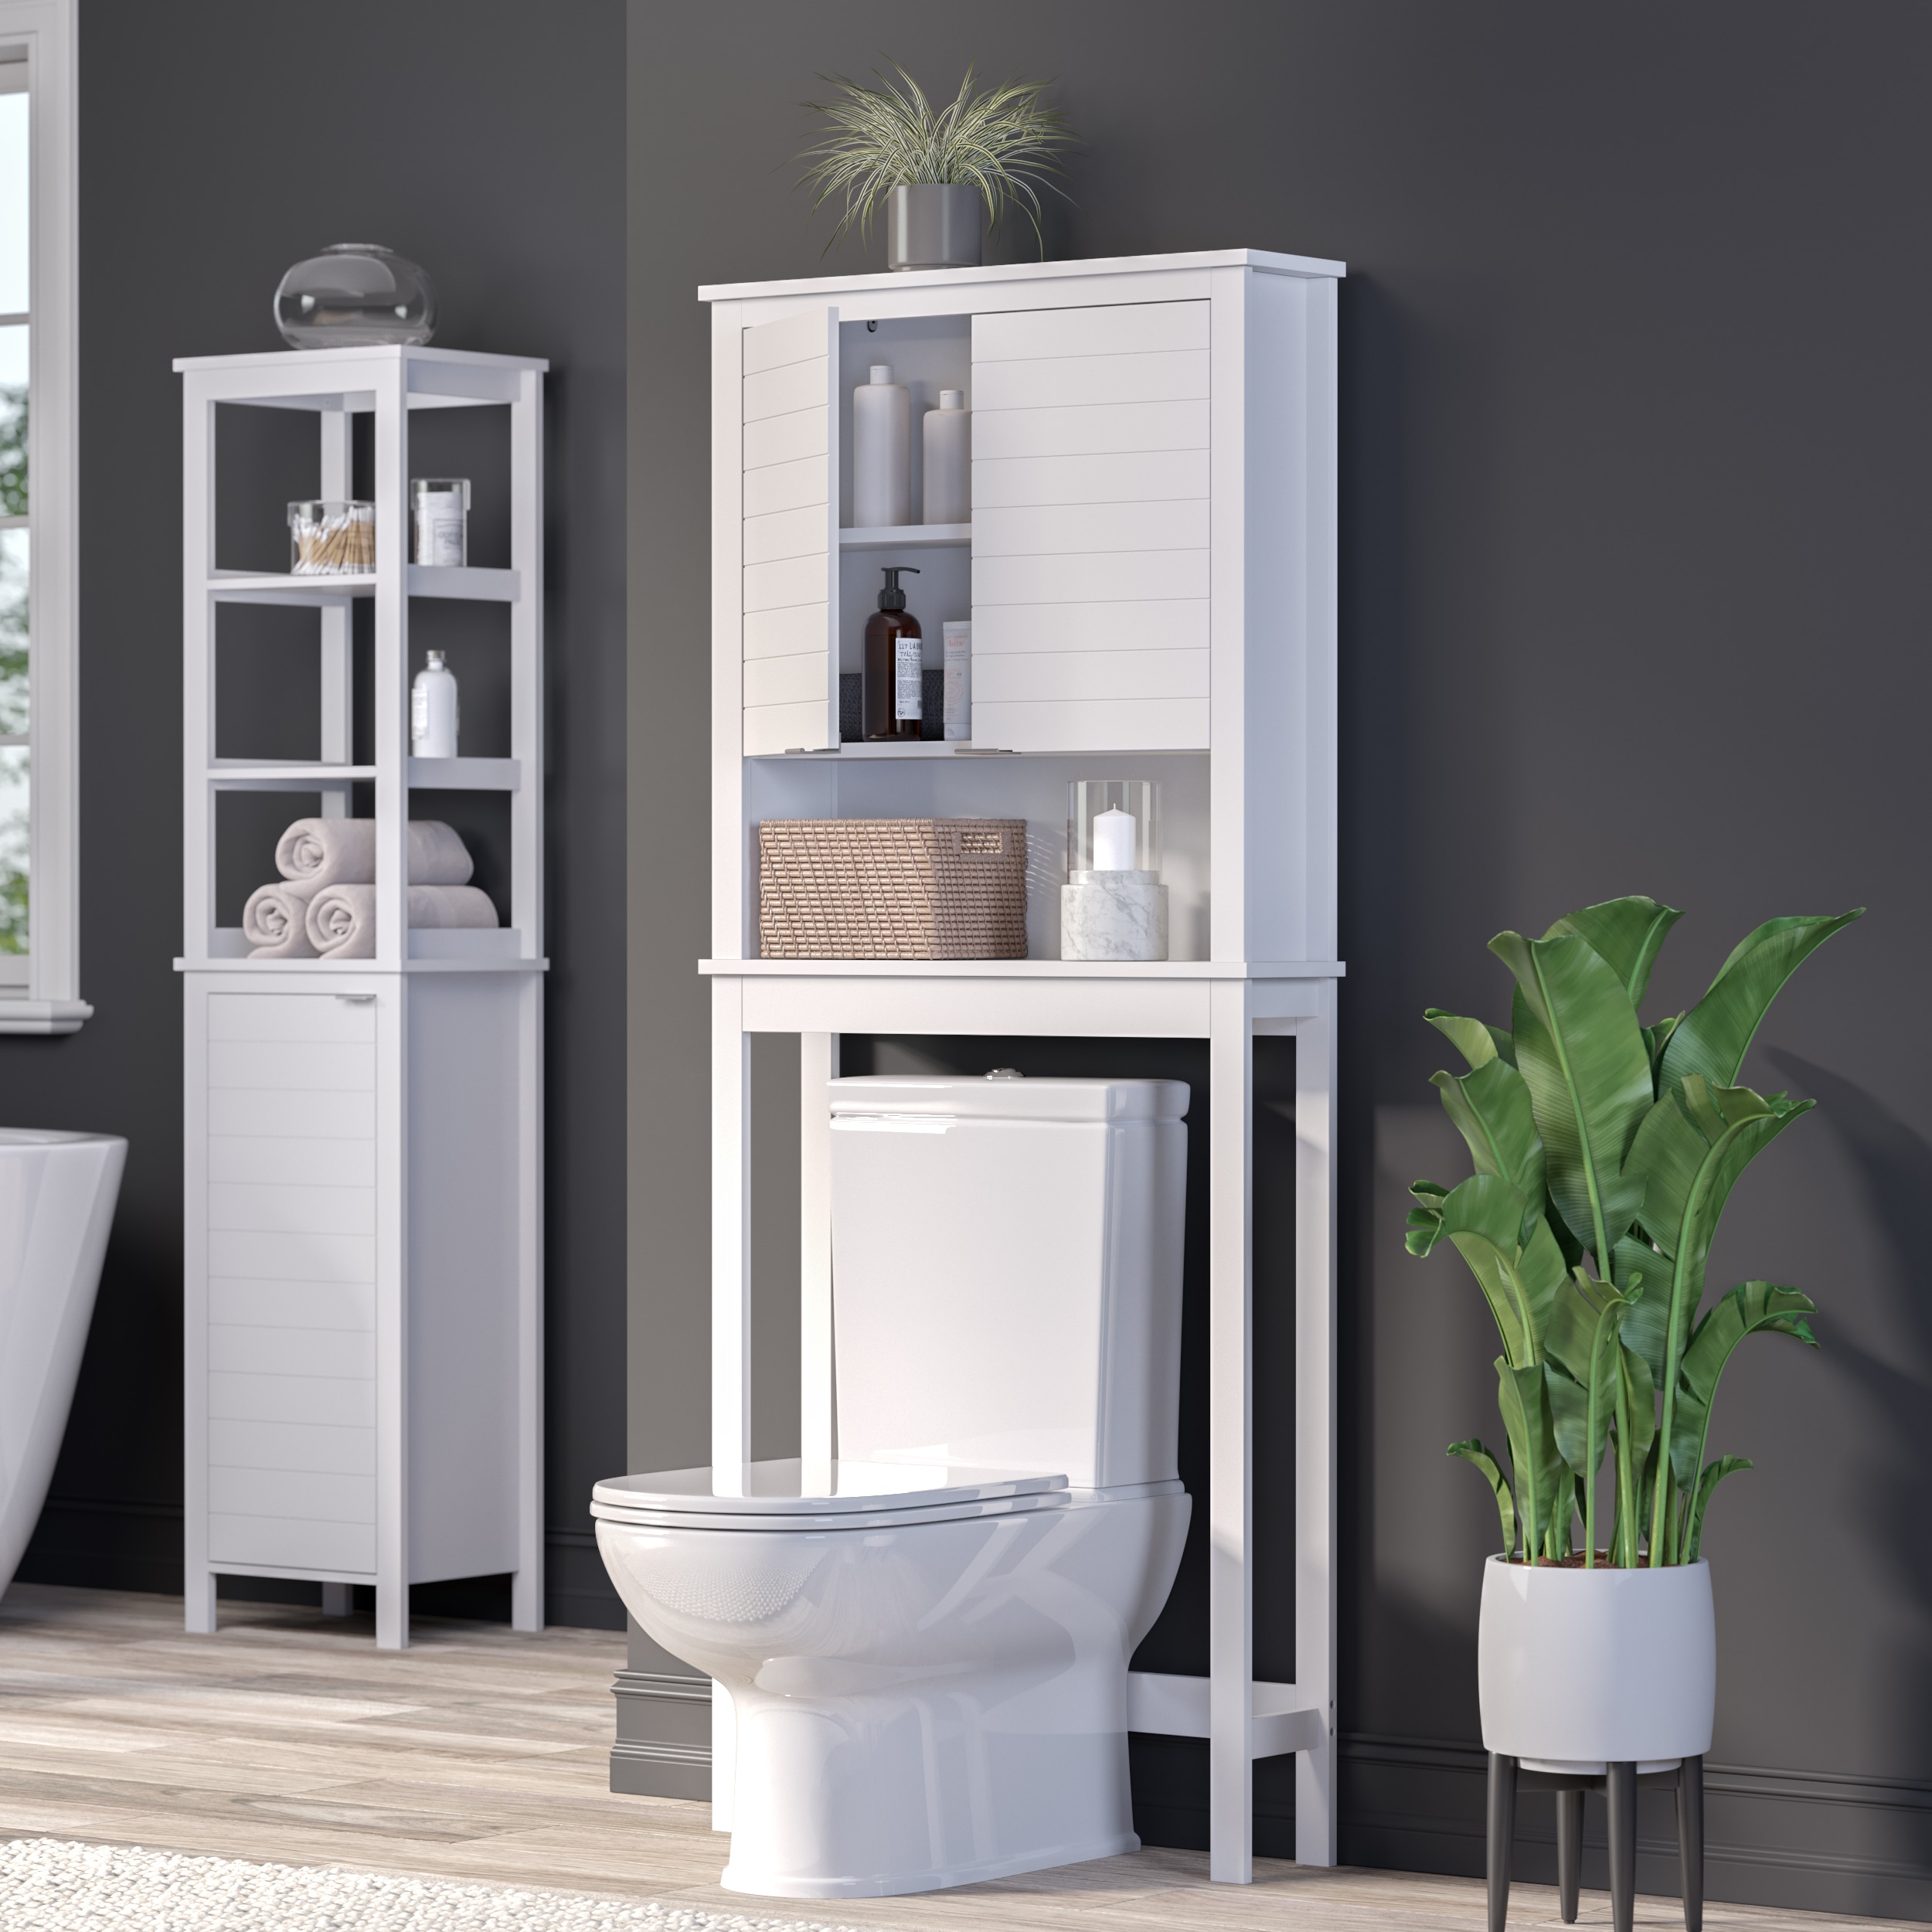 Aoibox Modern Over The Toilet Space Saver Organization Wood